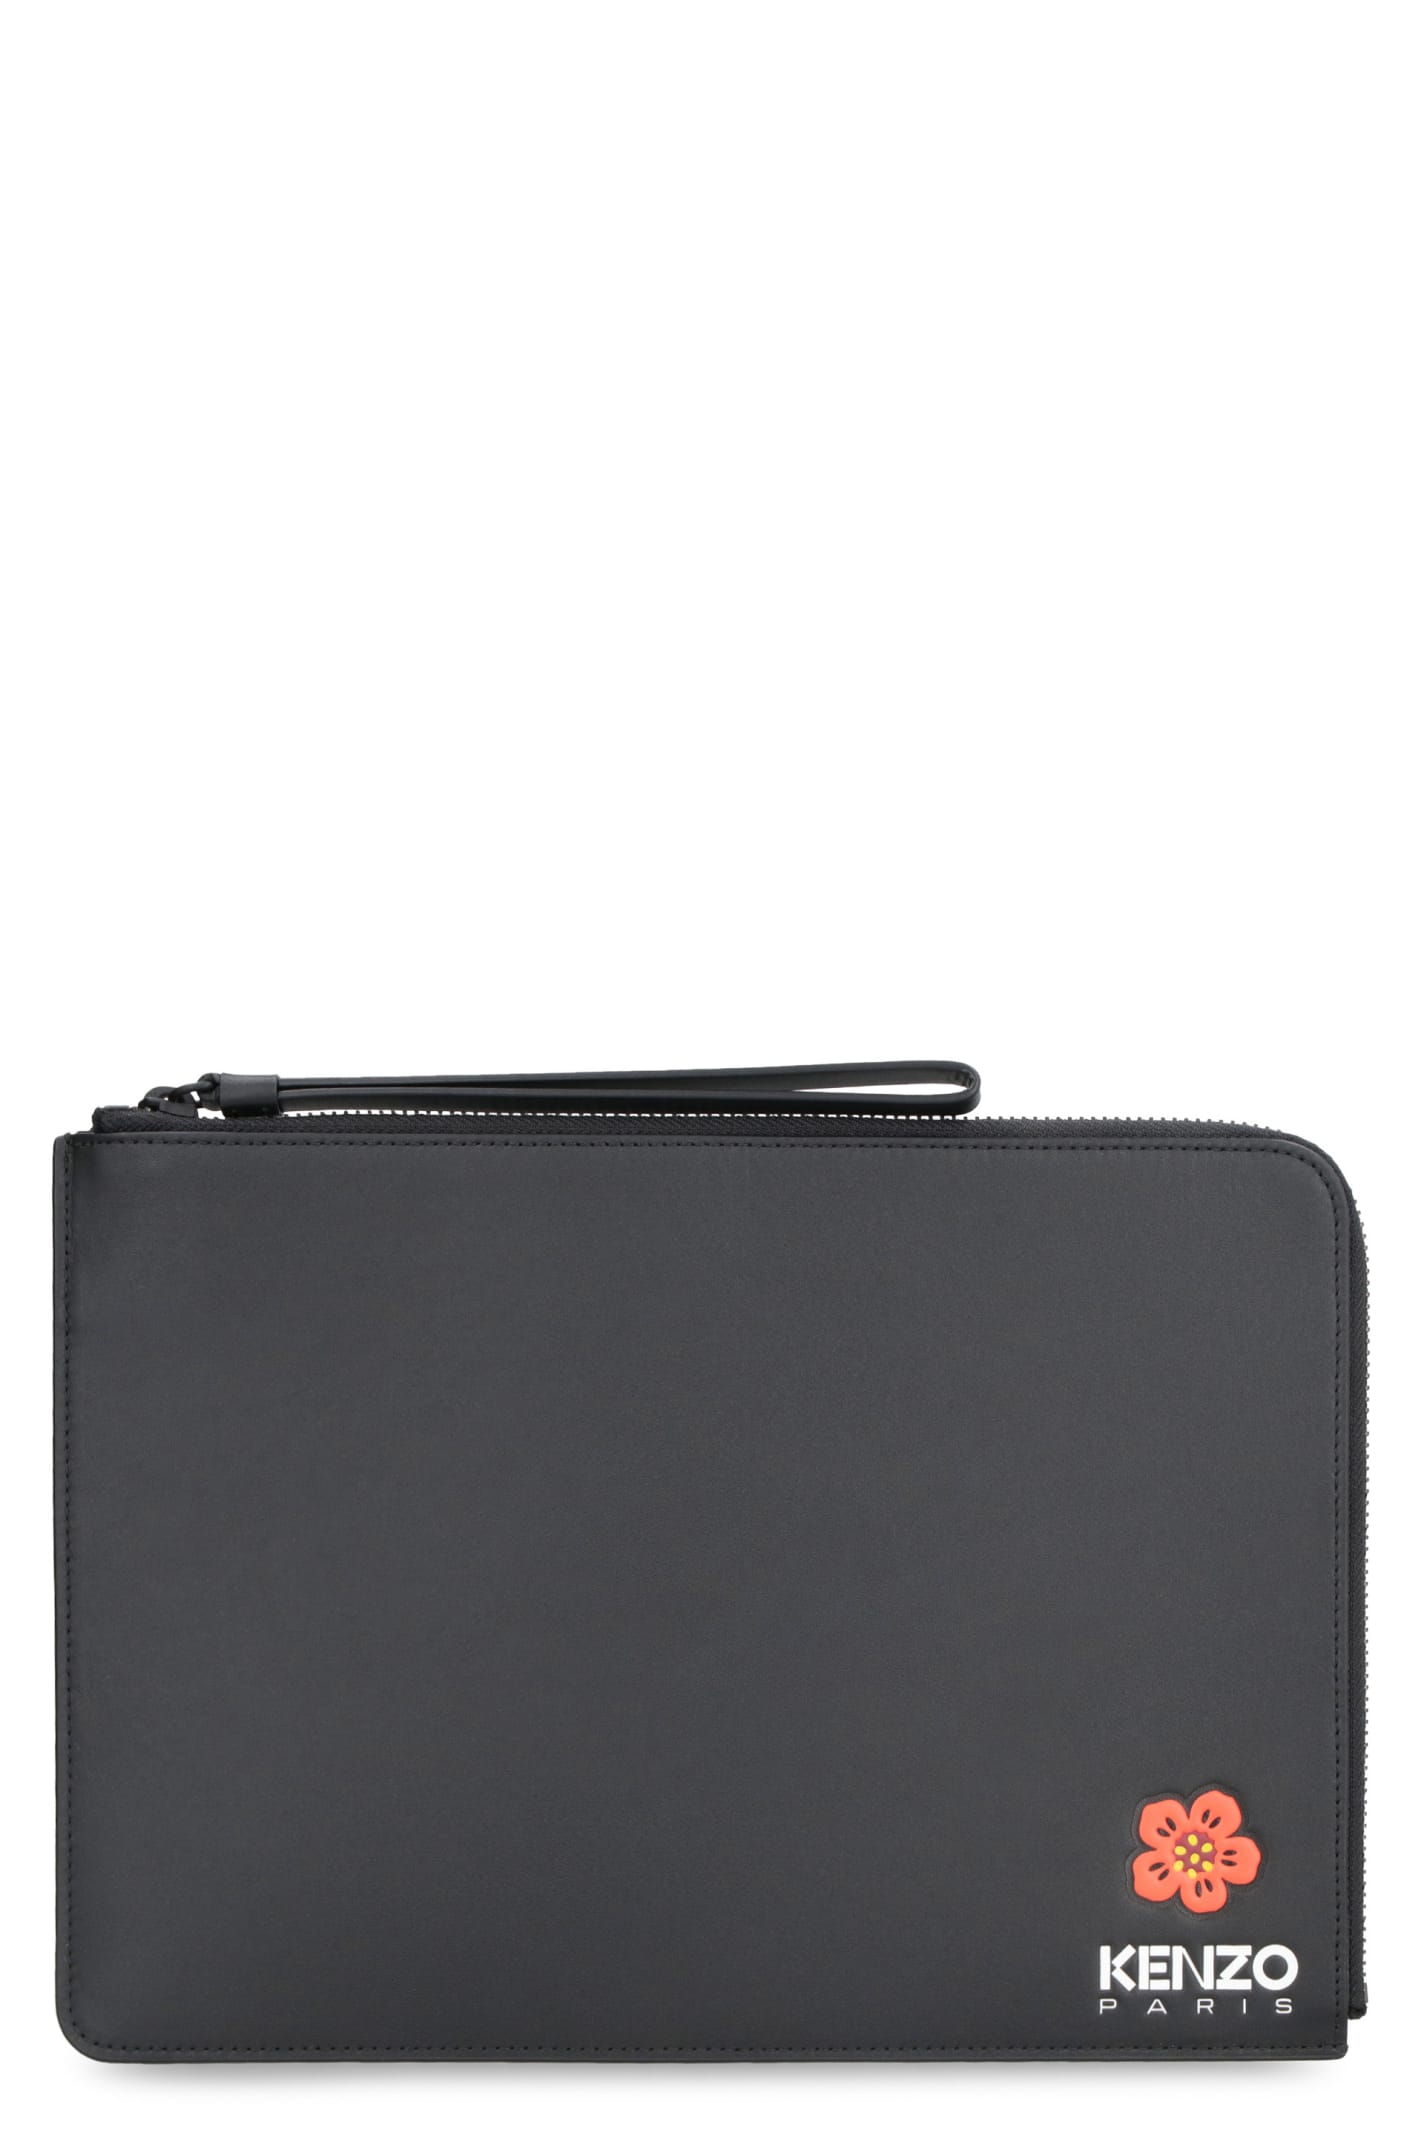 Kenzo Leather Flat Pouch In Black